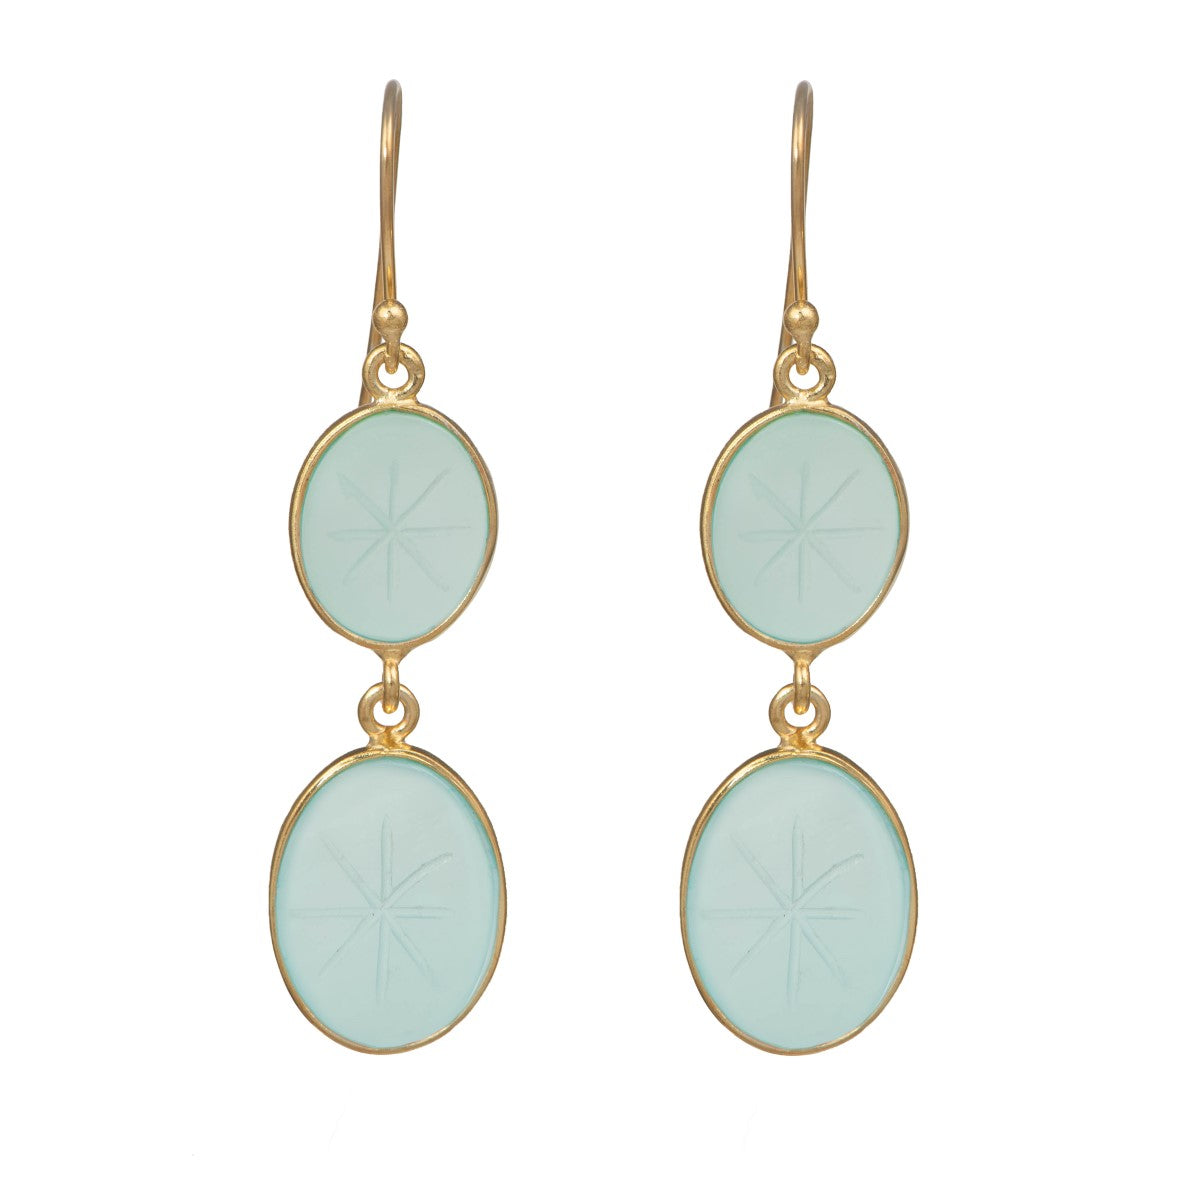 Star Patterned Oval Aqua Chalcedony Gemstone Earrings in Gold Plated Sterling Silver